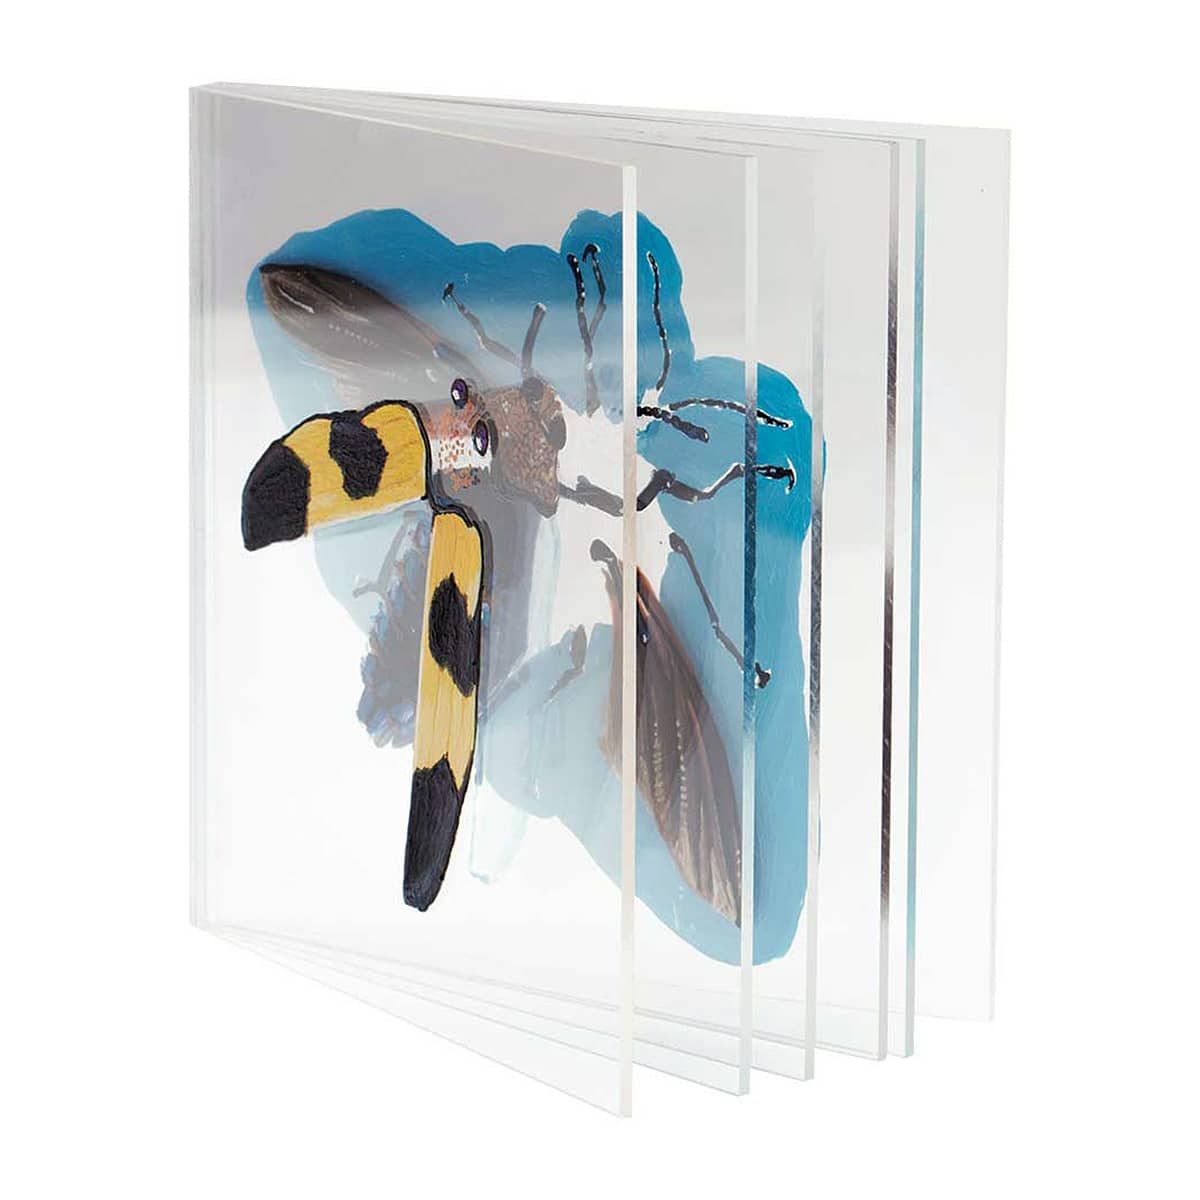 Creating layered artworks with several 
2mm clear acrylic panels